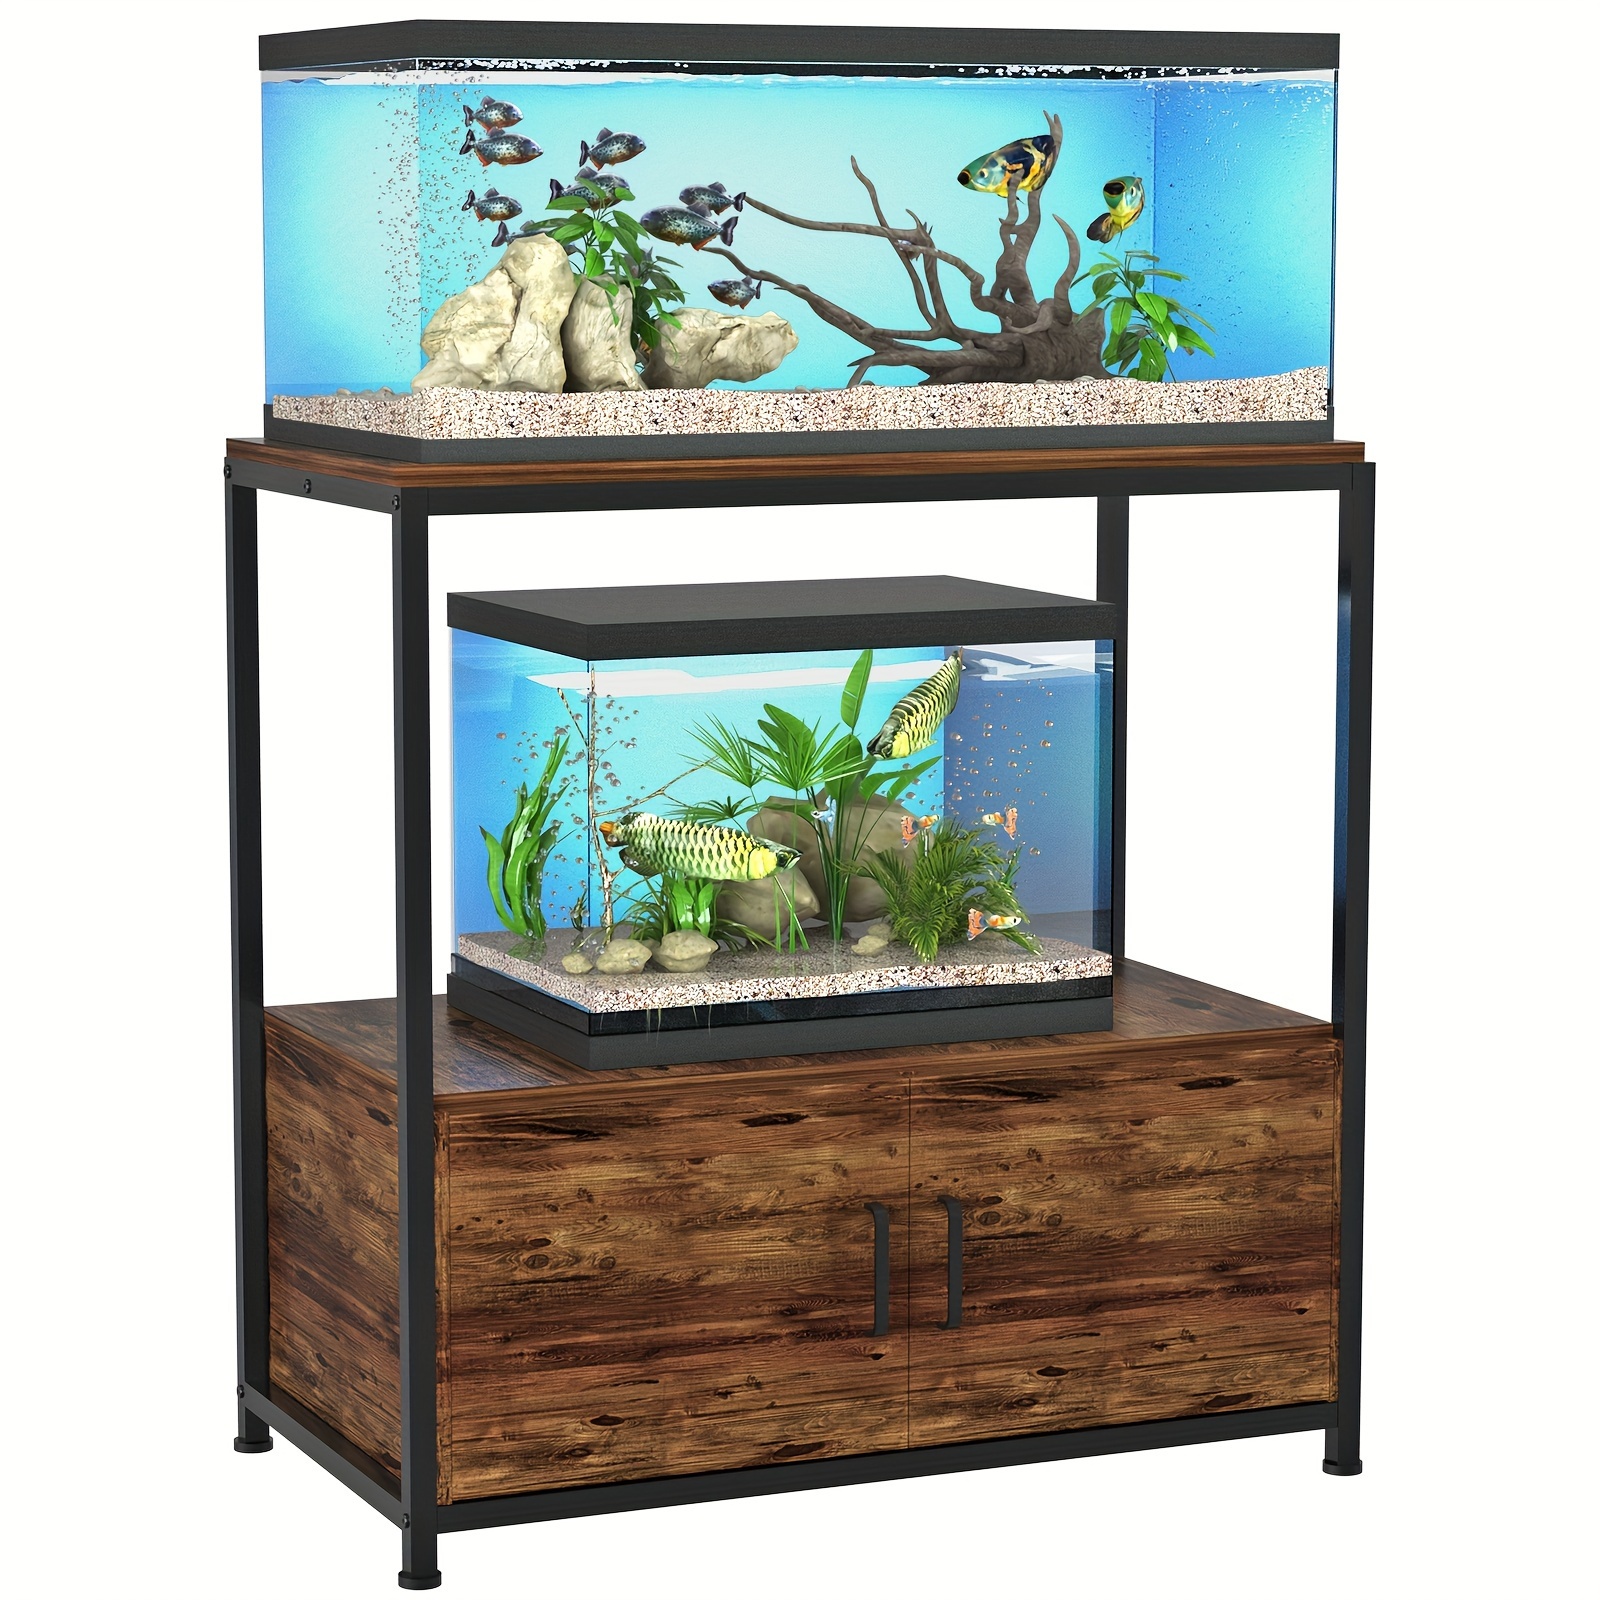 

1 Pcs Fish Tank Stand For 20-29 Gallon Aquarium, Heavy Duty Metal Wood Aquarium Stand With Cabinet Accessories Storage & Adjustable Table Feet, 30.7" Lx15.74 W Tabletop